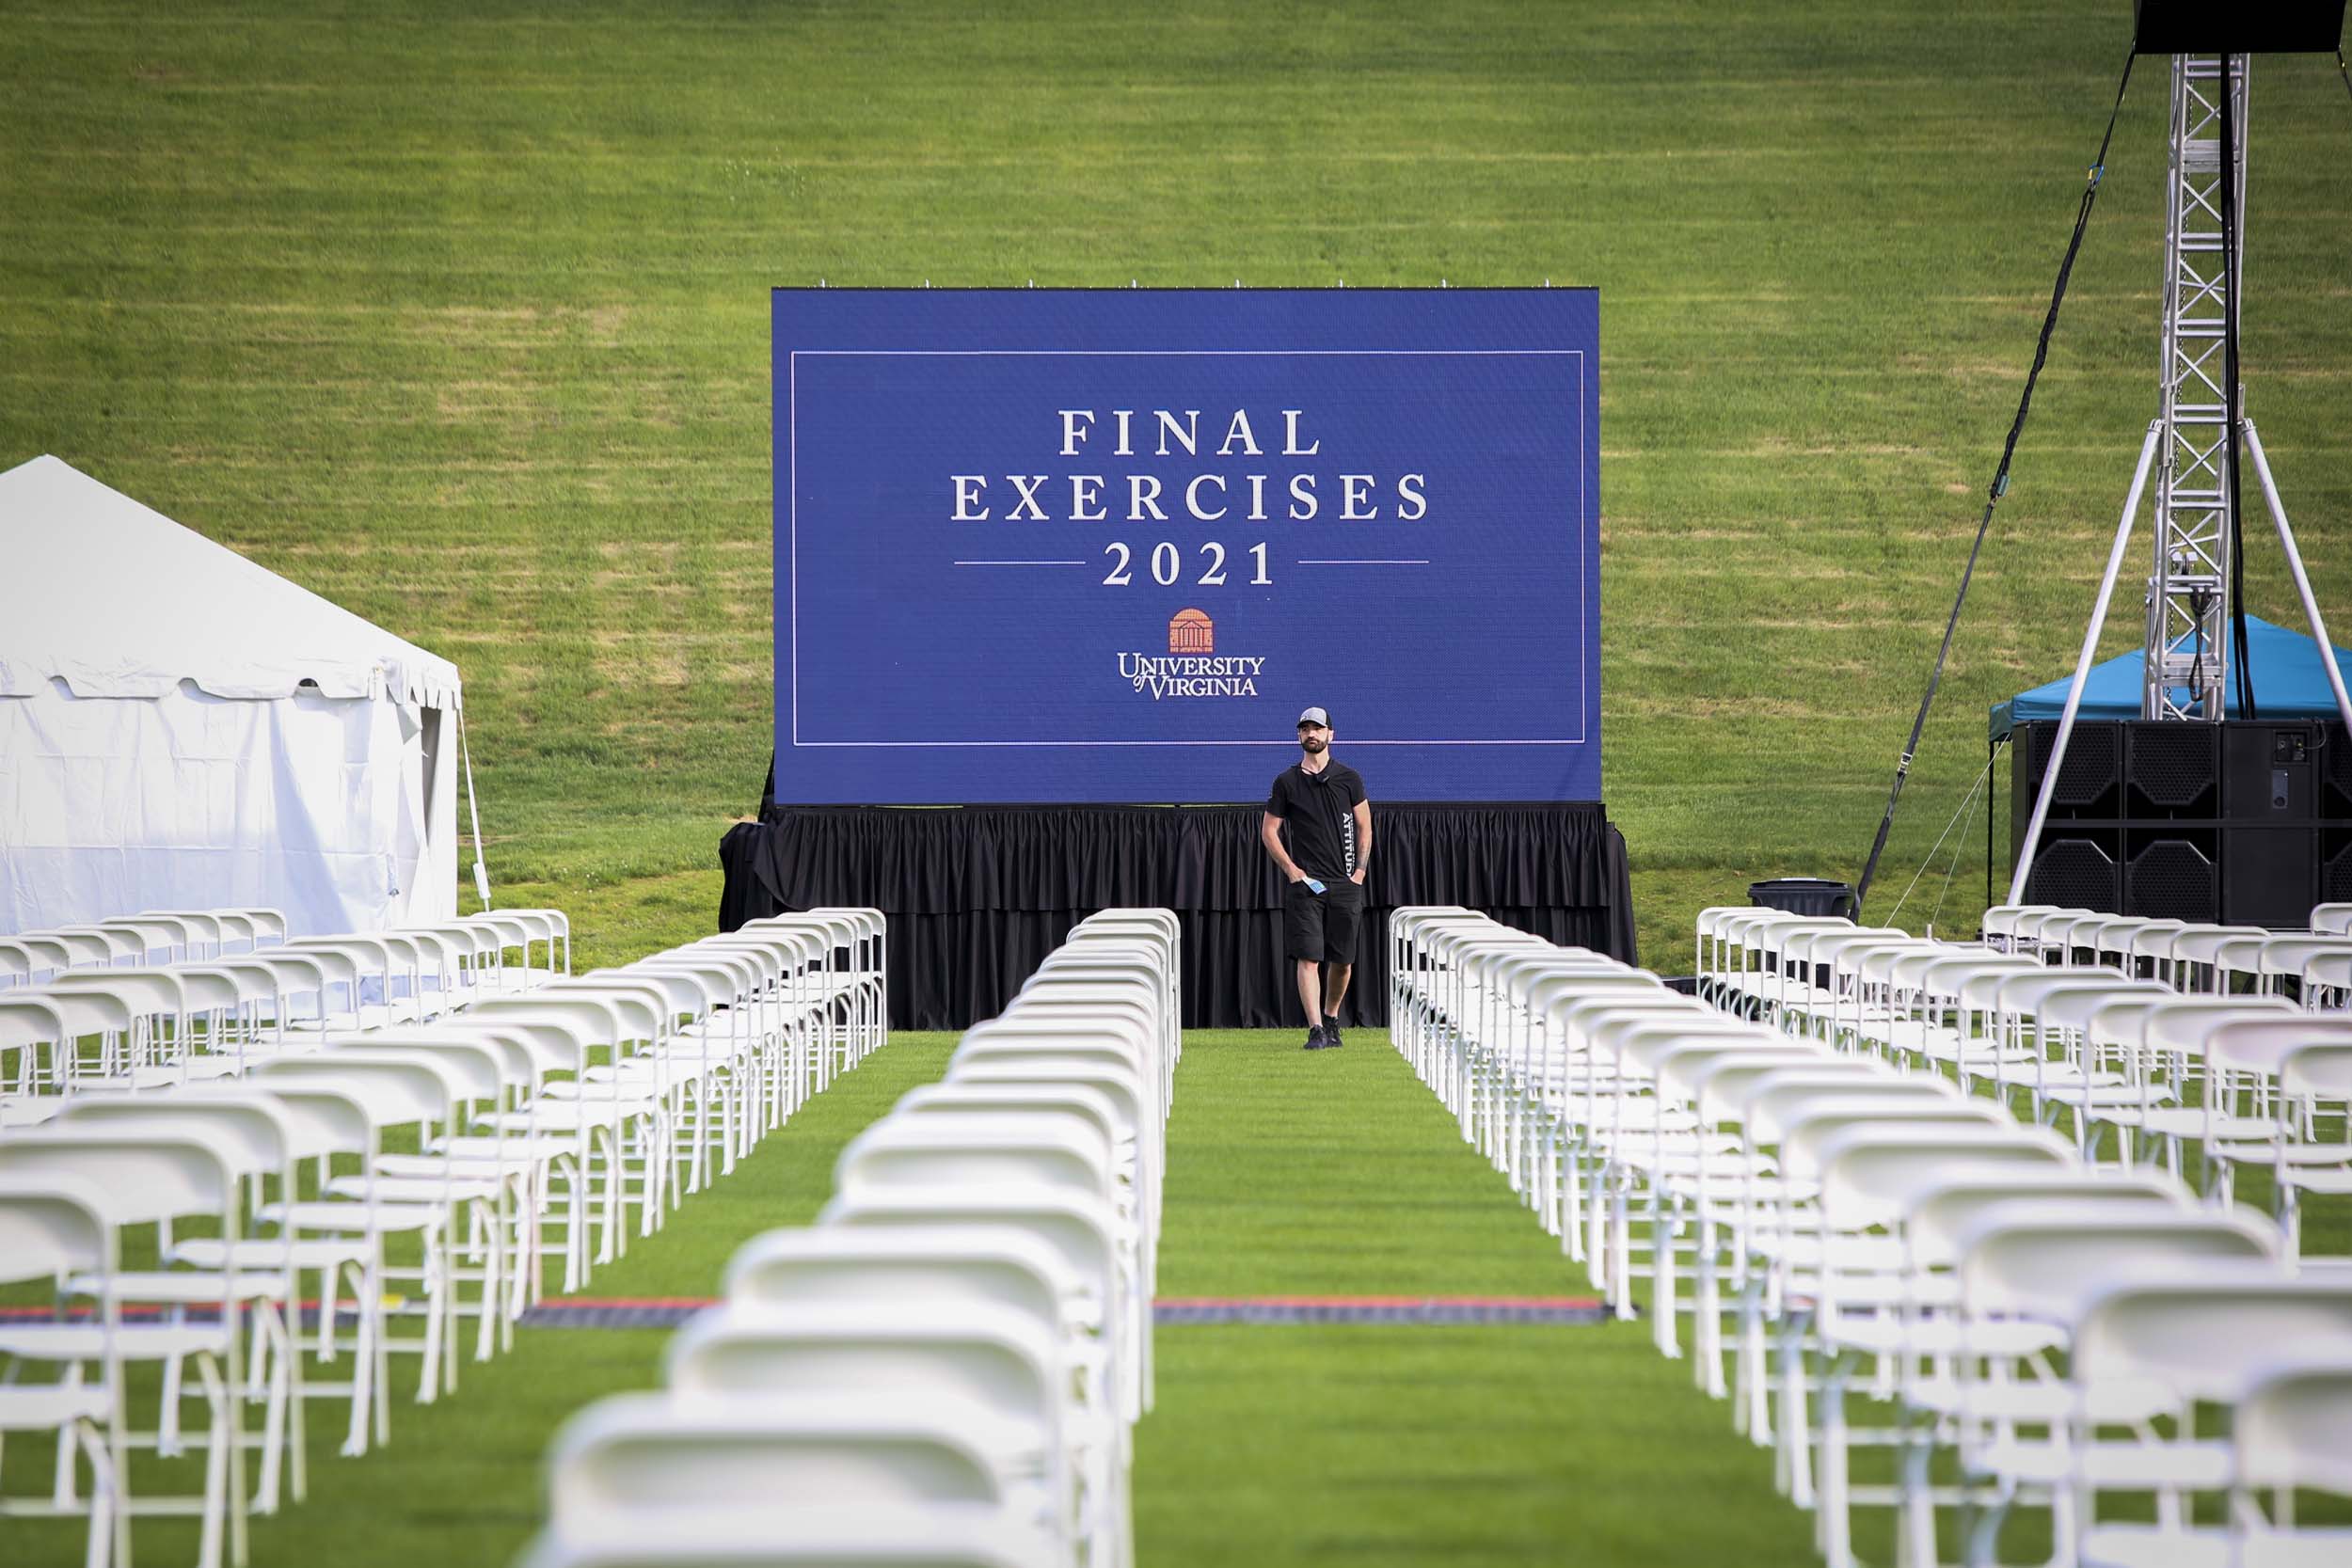 Chairs lined up in columns in front of a sign that says Final Exercises 2021 with the UVA stacked logo